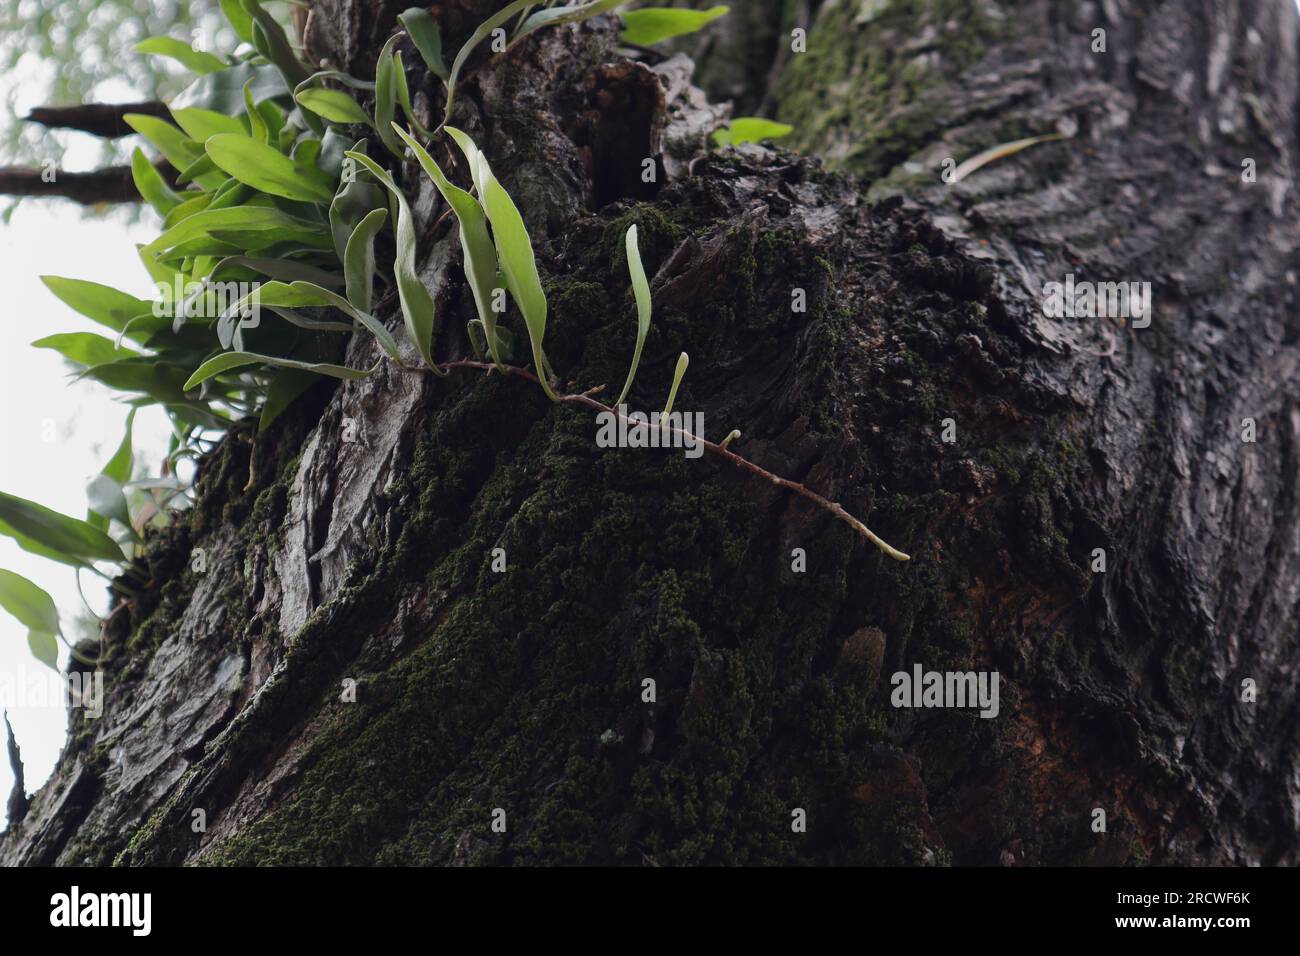 A fern plant growing on top of the trunk surface of an Acacia Auriculiformis Tree, a low angle view Stock Photo